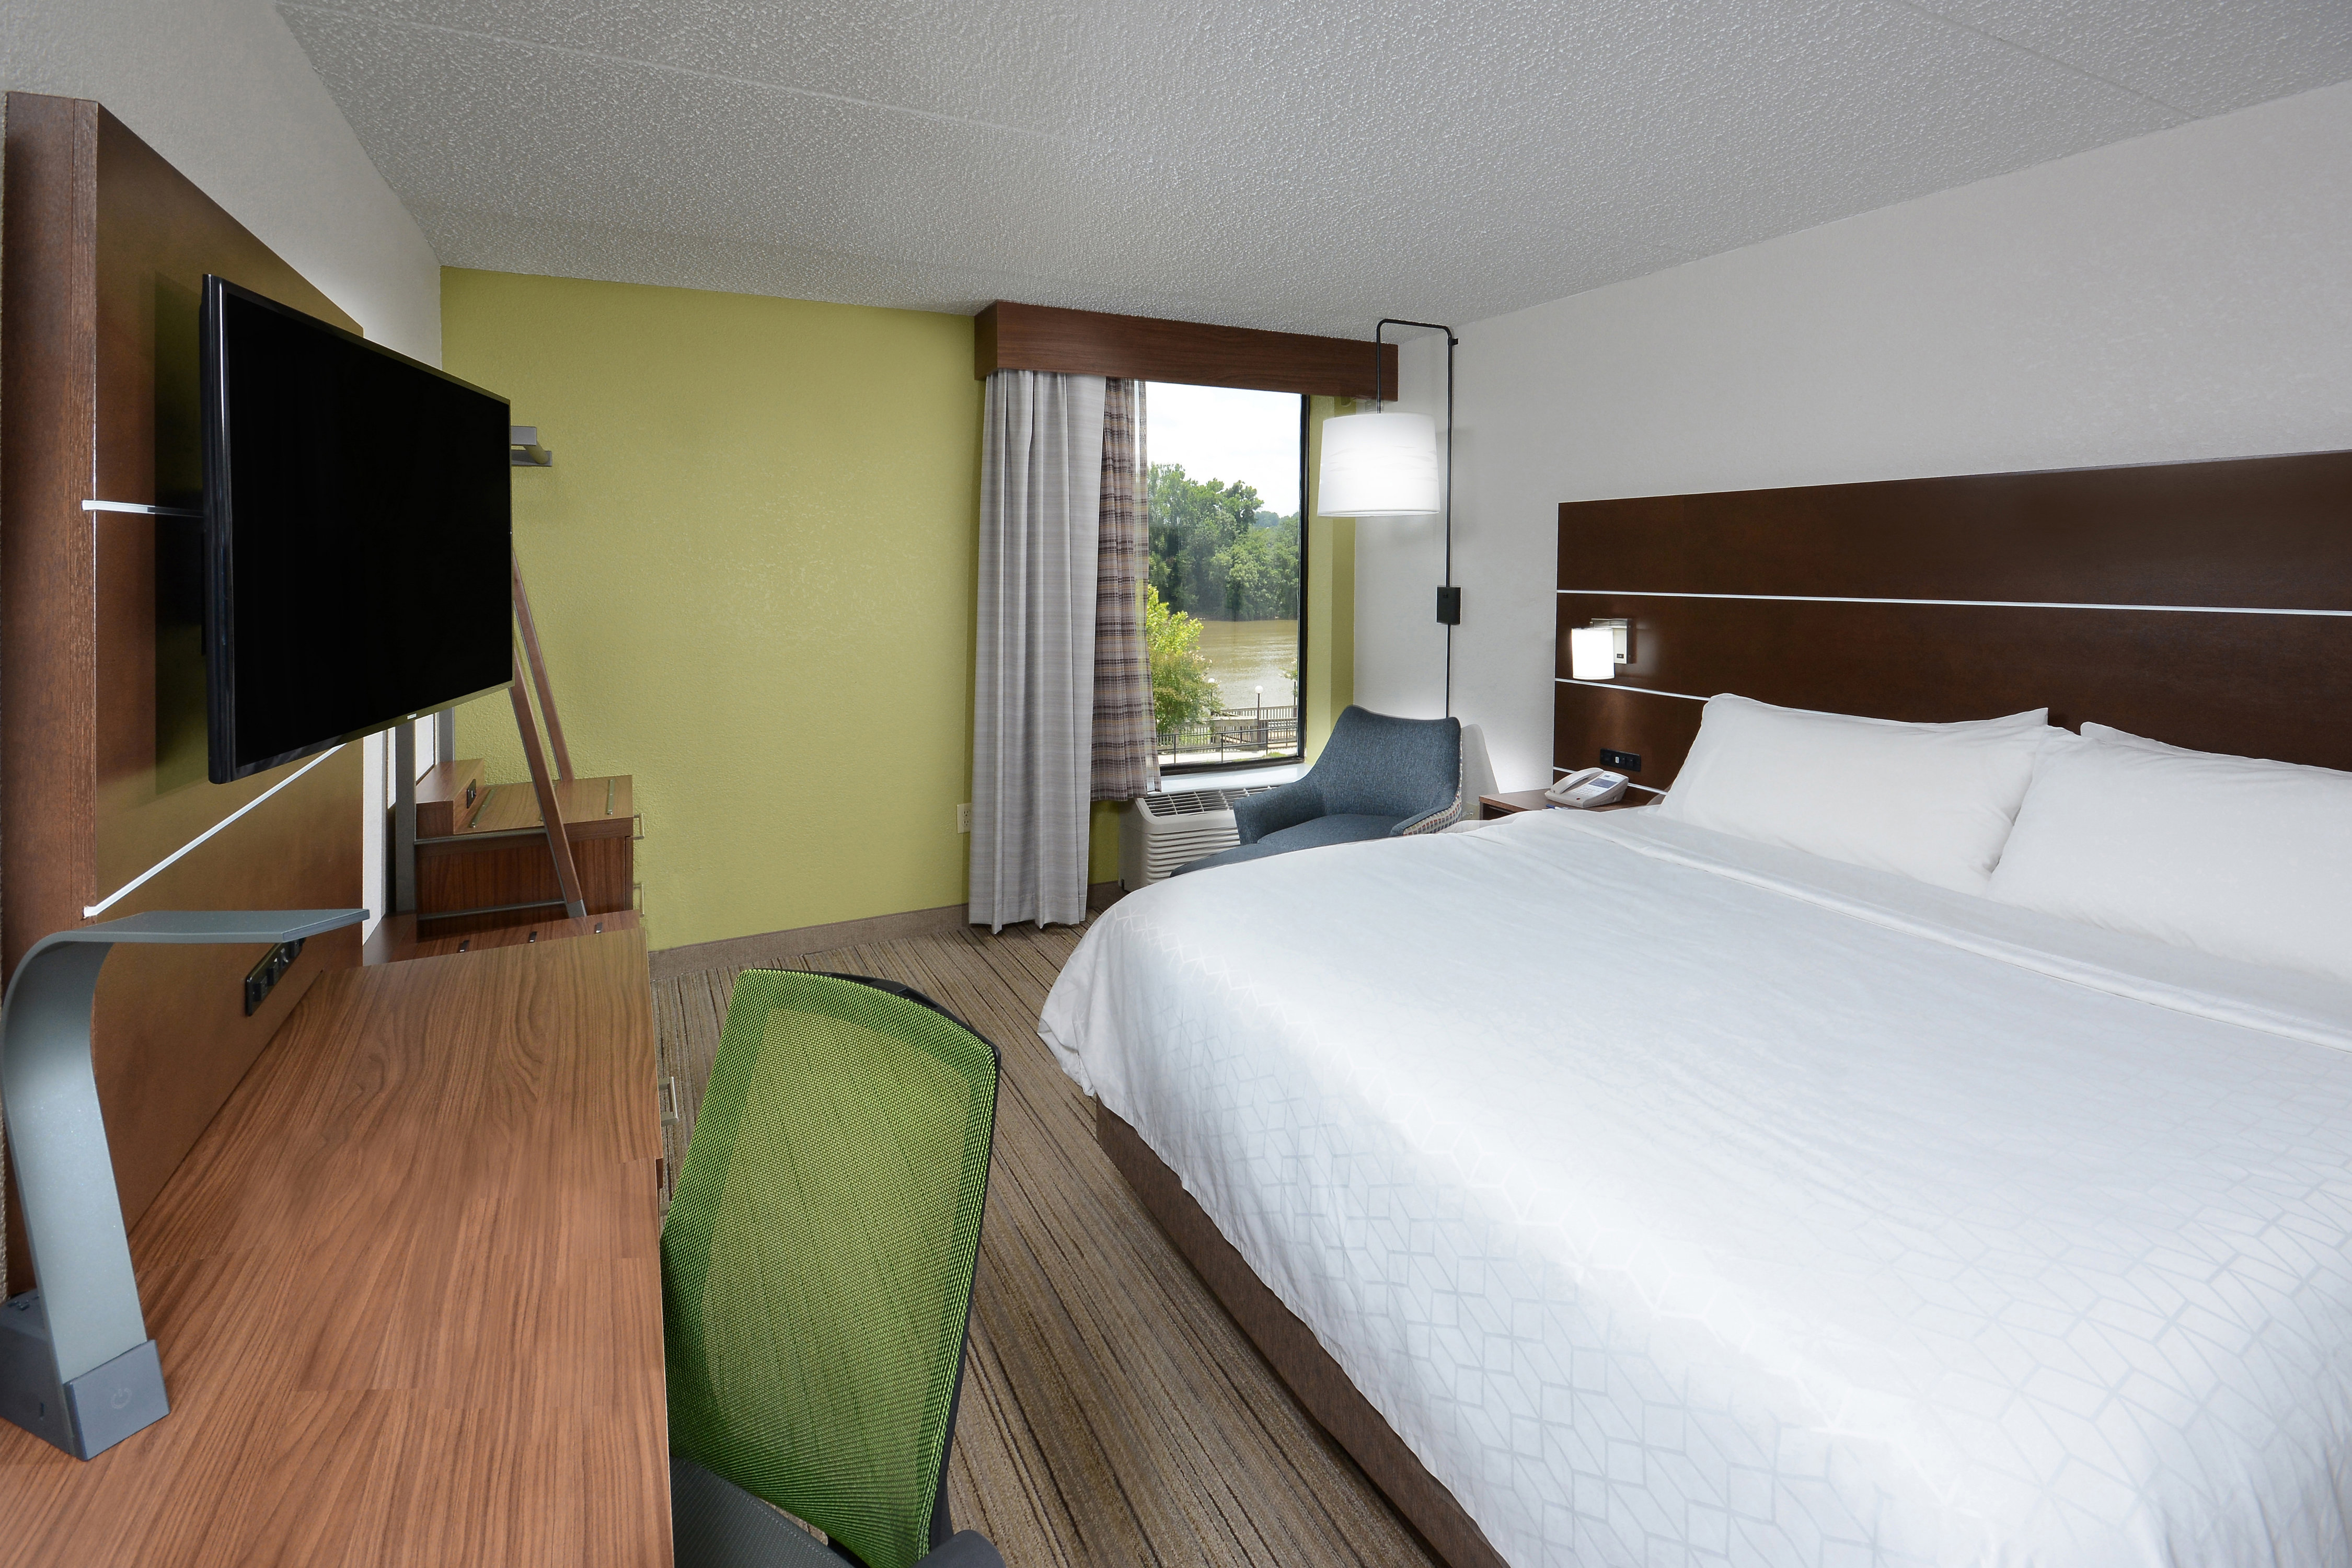 Enjoy river views when you book a King room at our Danville hotel.